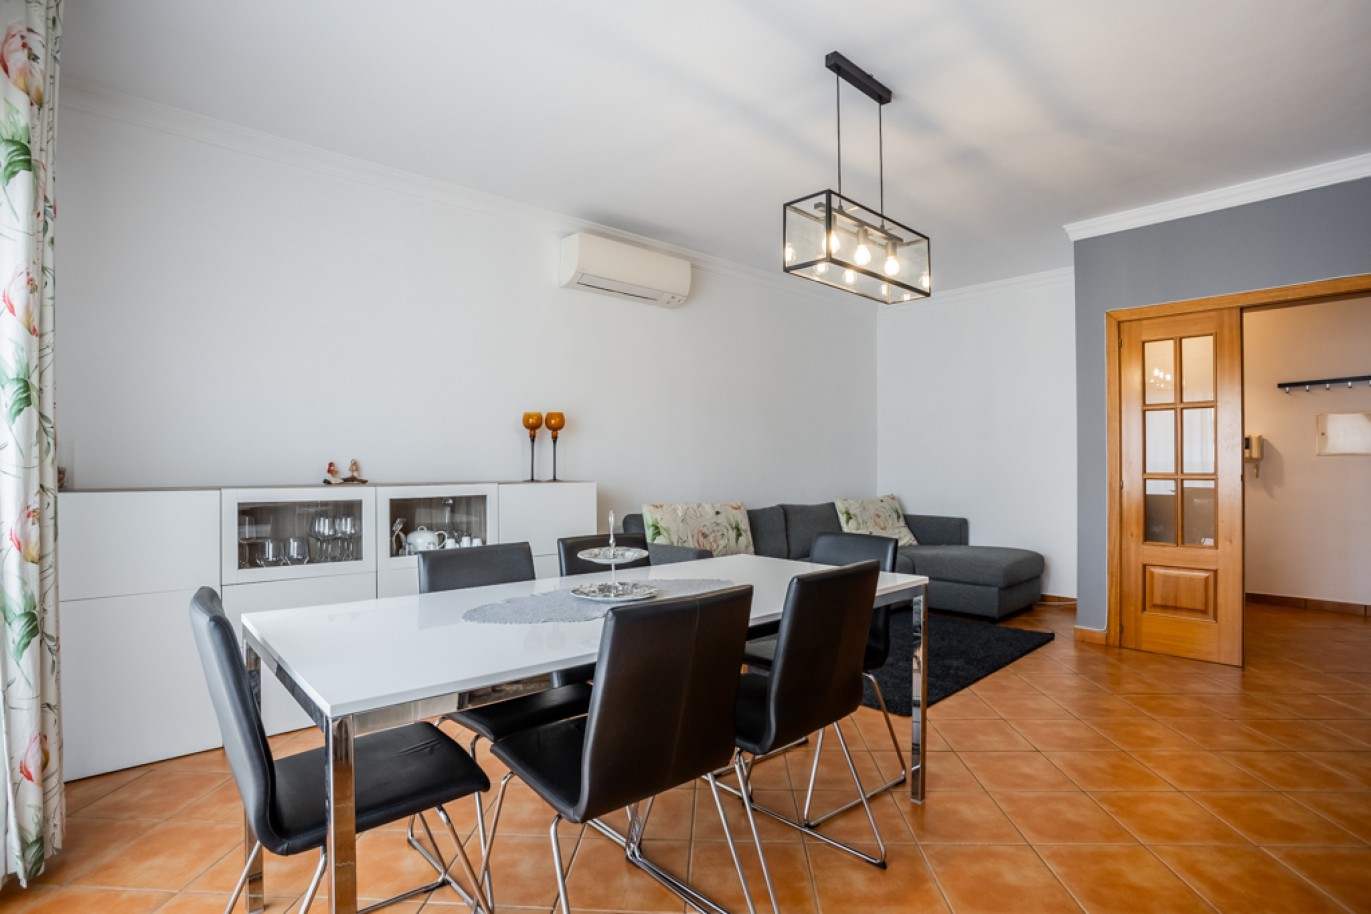 2-Bedroom Appartment with rooftop, for sale in Lagos, Algarve_267206